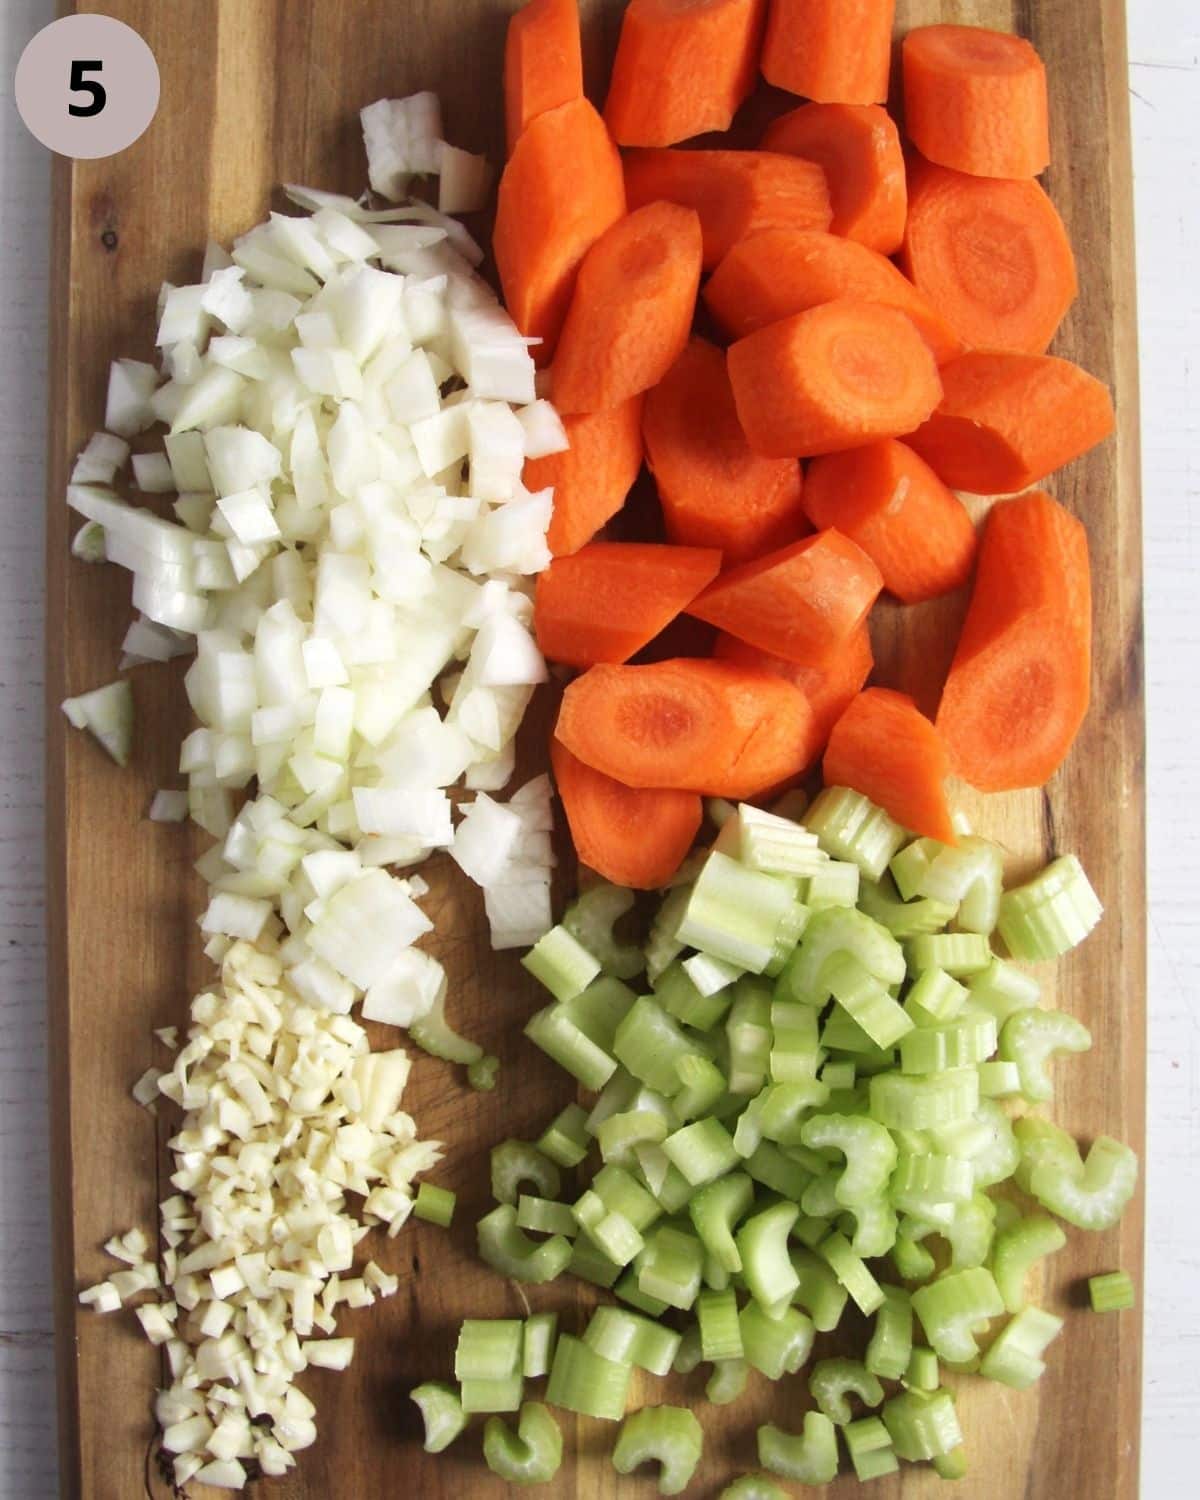 chopped carrots, onions, garlic and celery on a wooden board.